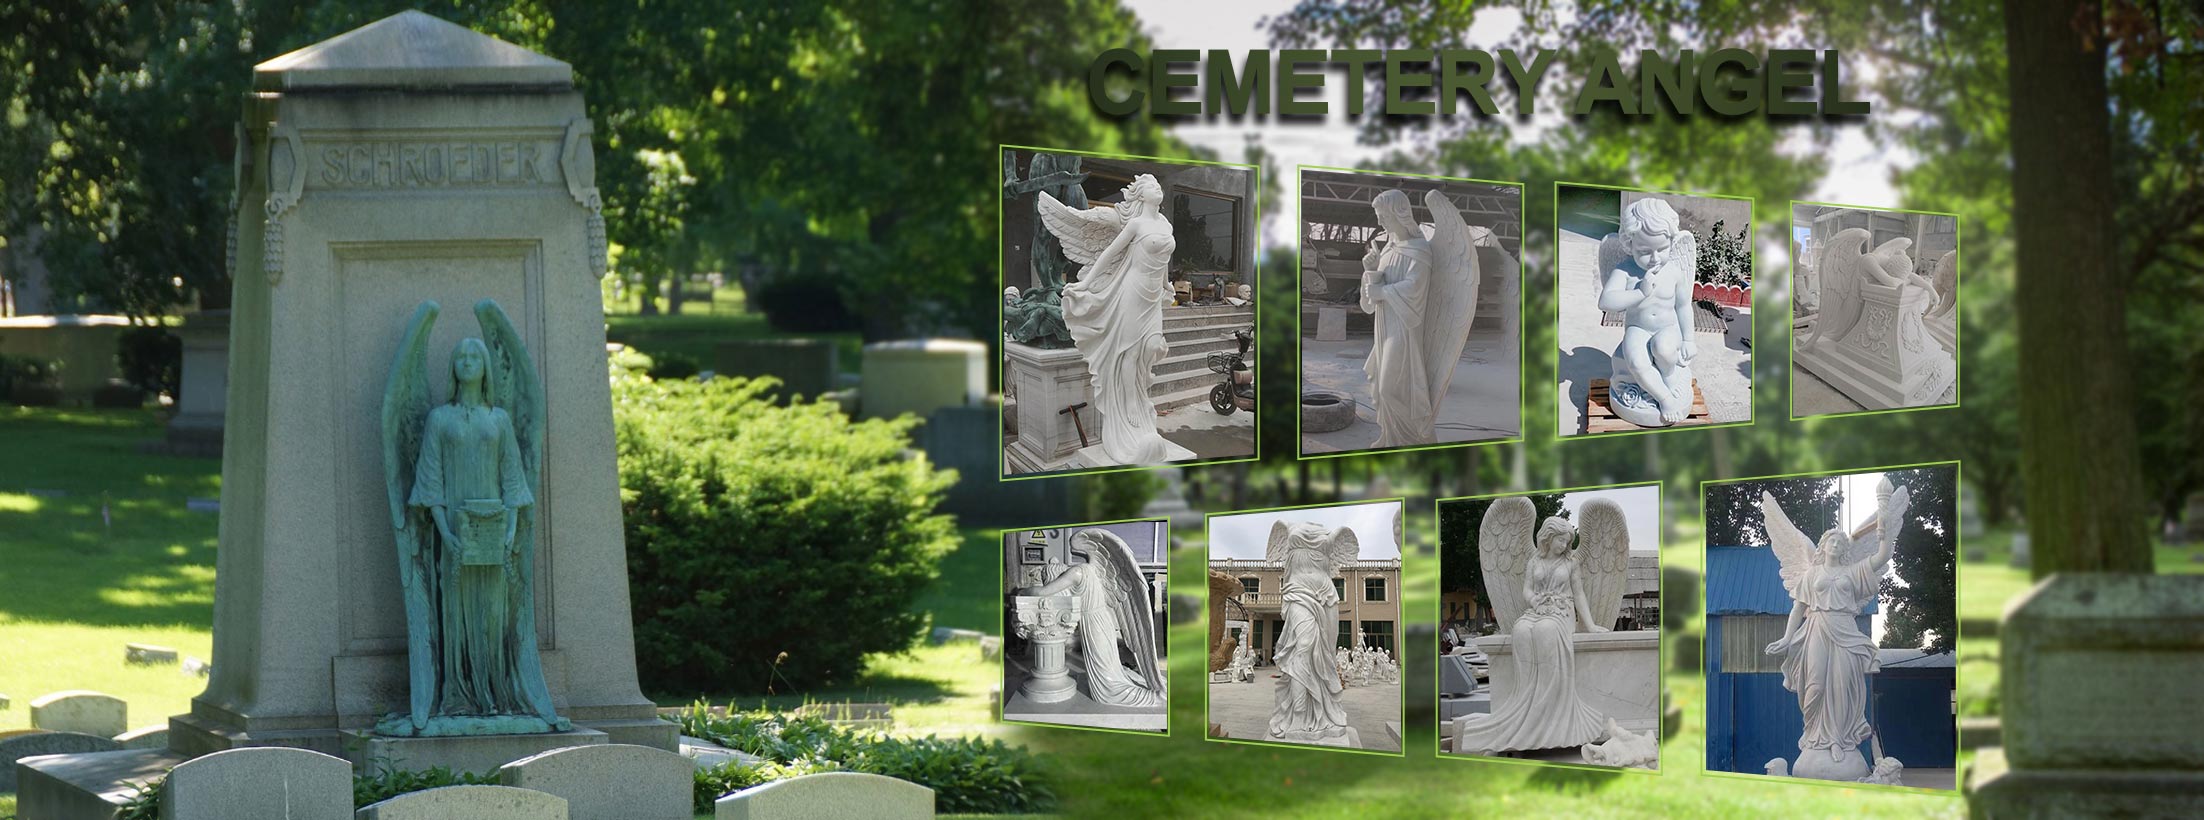 Cemetery Angel Statue marble